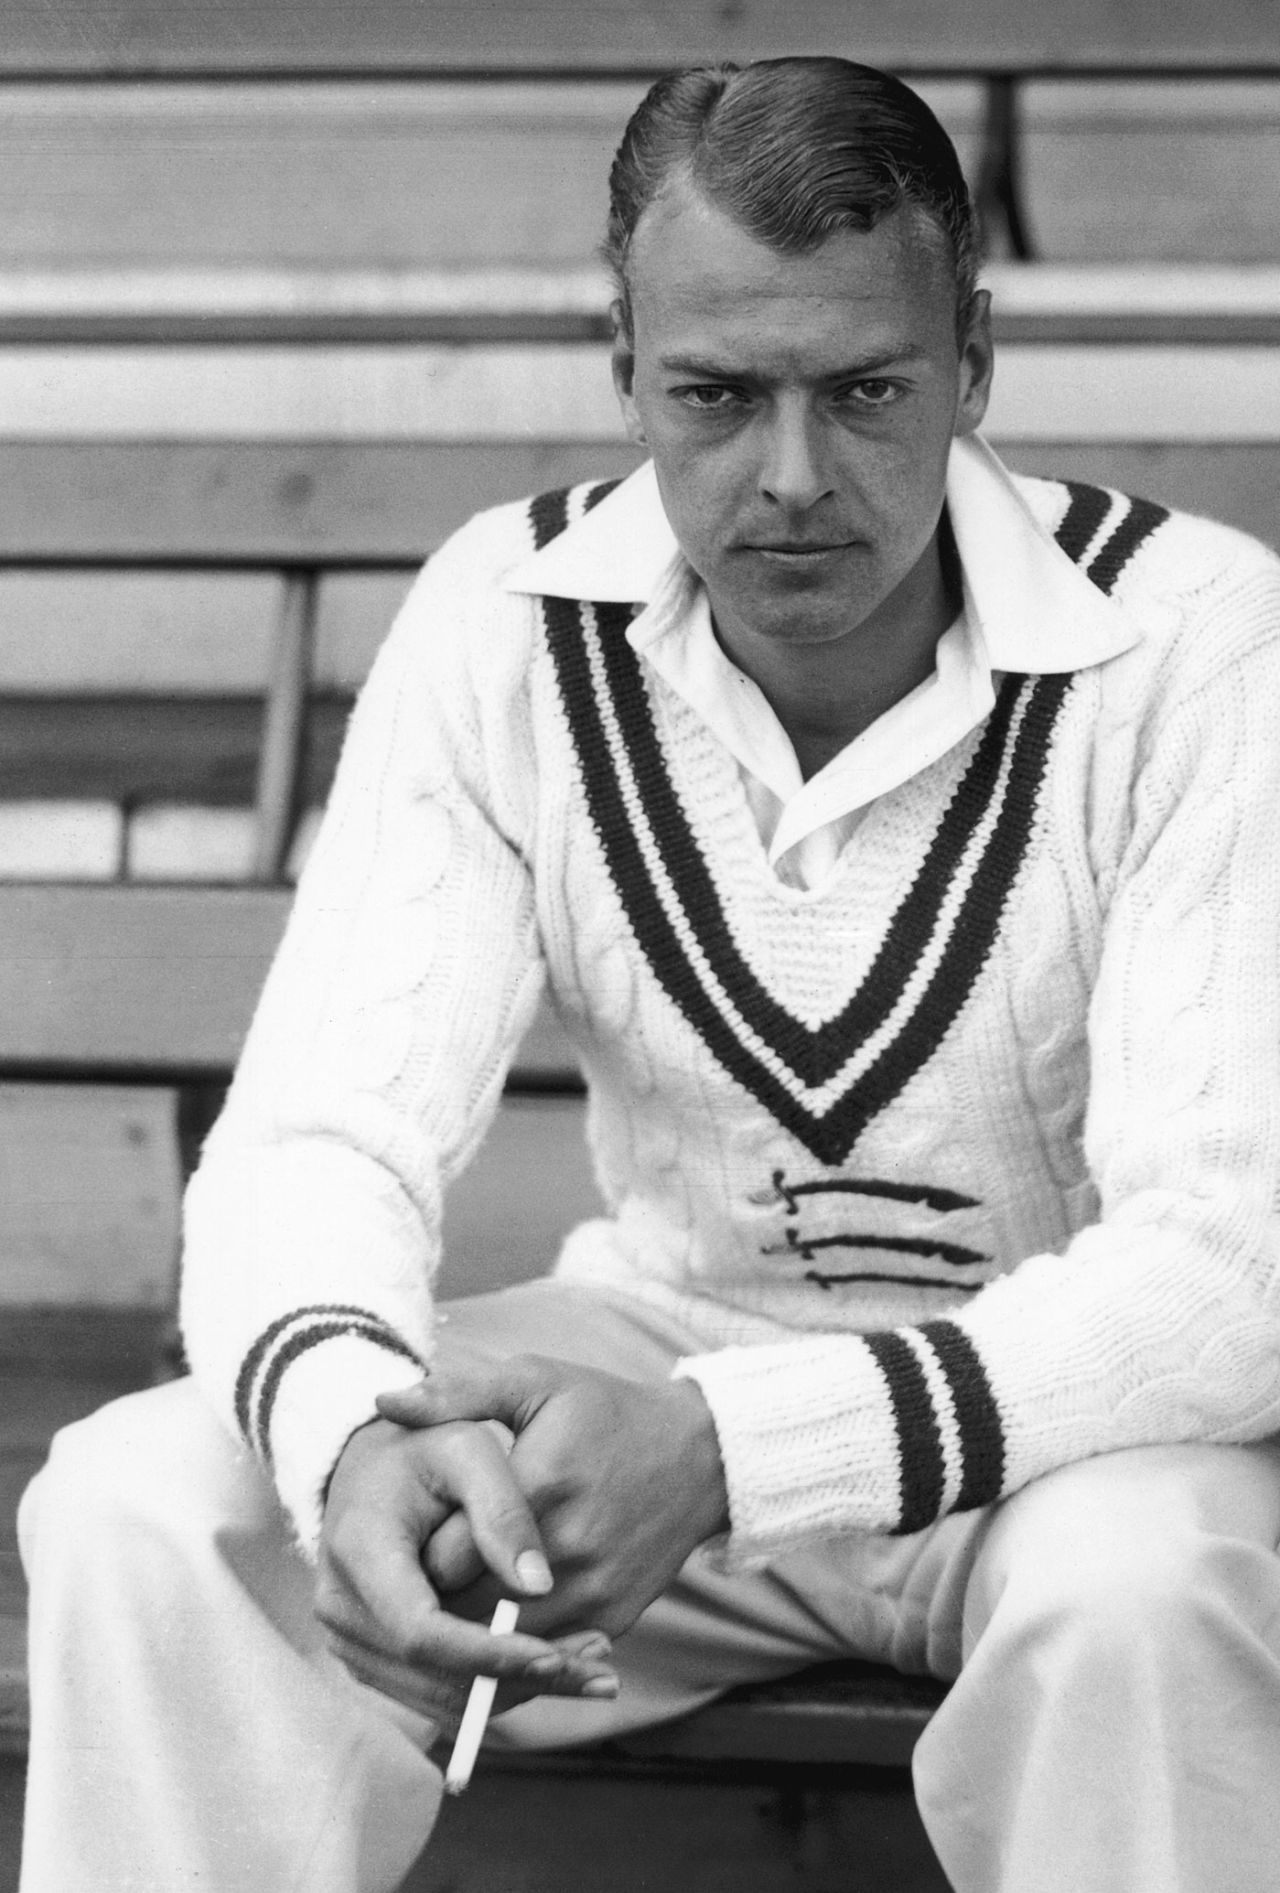 Ian Peebles of England and Middlesex, circa 1930